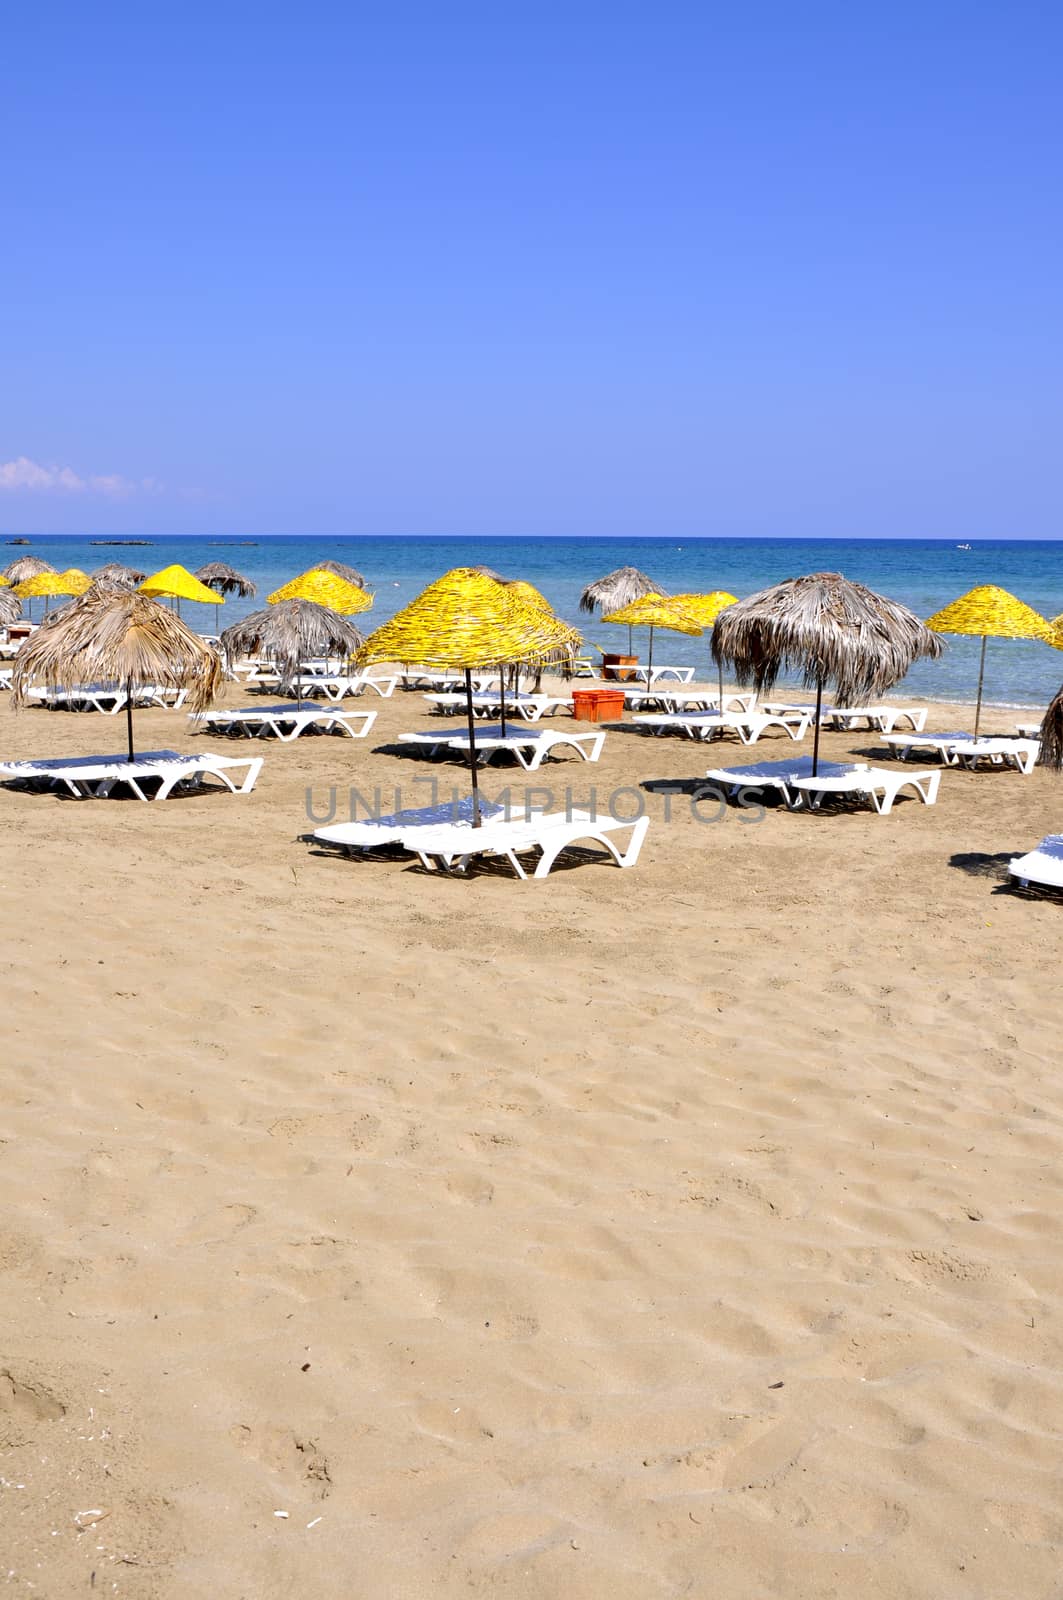 Handmade palm leaf and cane umbrellas on a beautiful Cyprus beach by mixeey